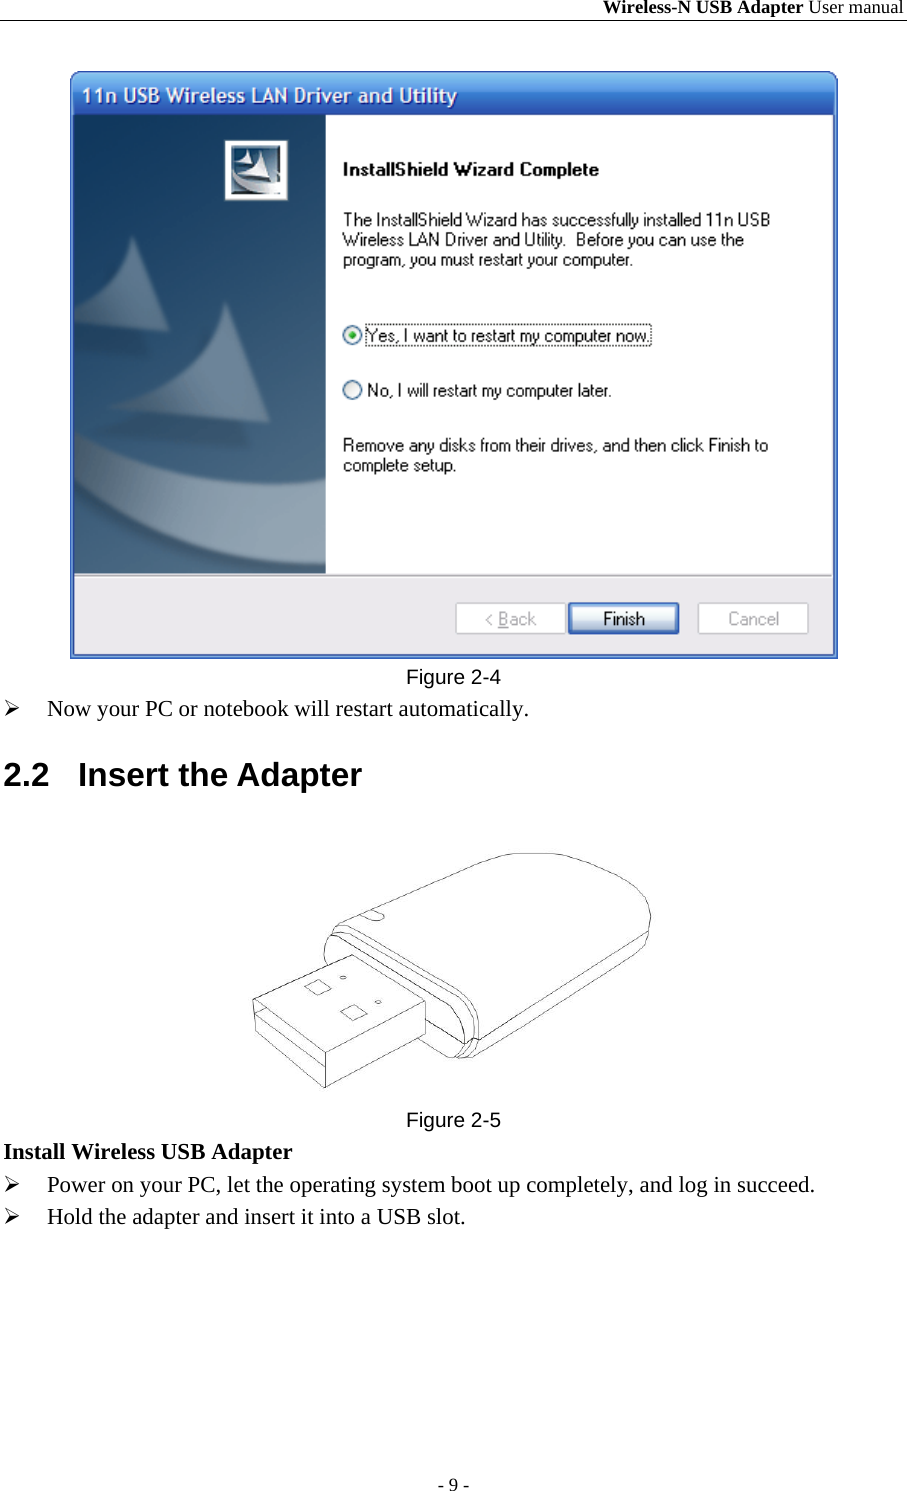 Wireless-N USB Adapter User manual - 9 -  Figure 2-4  Now your PC or notebook will restart automatically. 2.2 Insert the Adapter  Figure 2-5 Install Wireless USB Adapter  Power on your PC, let the operating system boot up completely, and log in succeed.  Hold the adapter and insert it into a USB slot. 